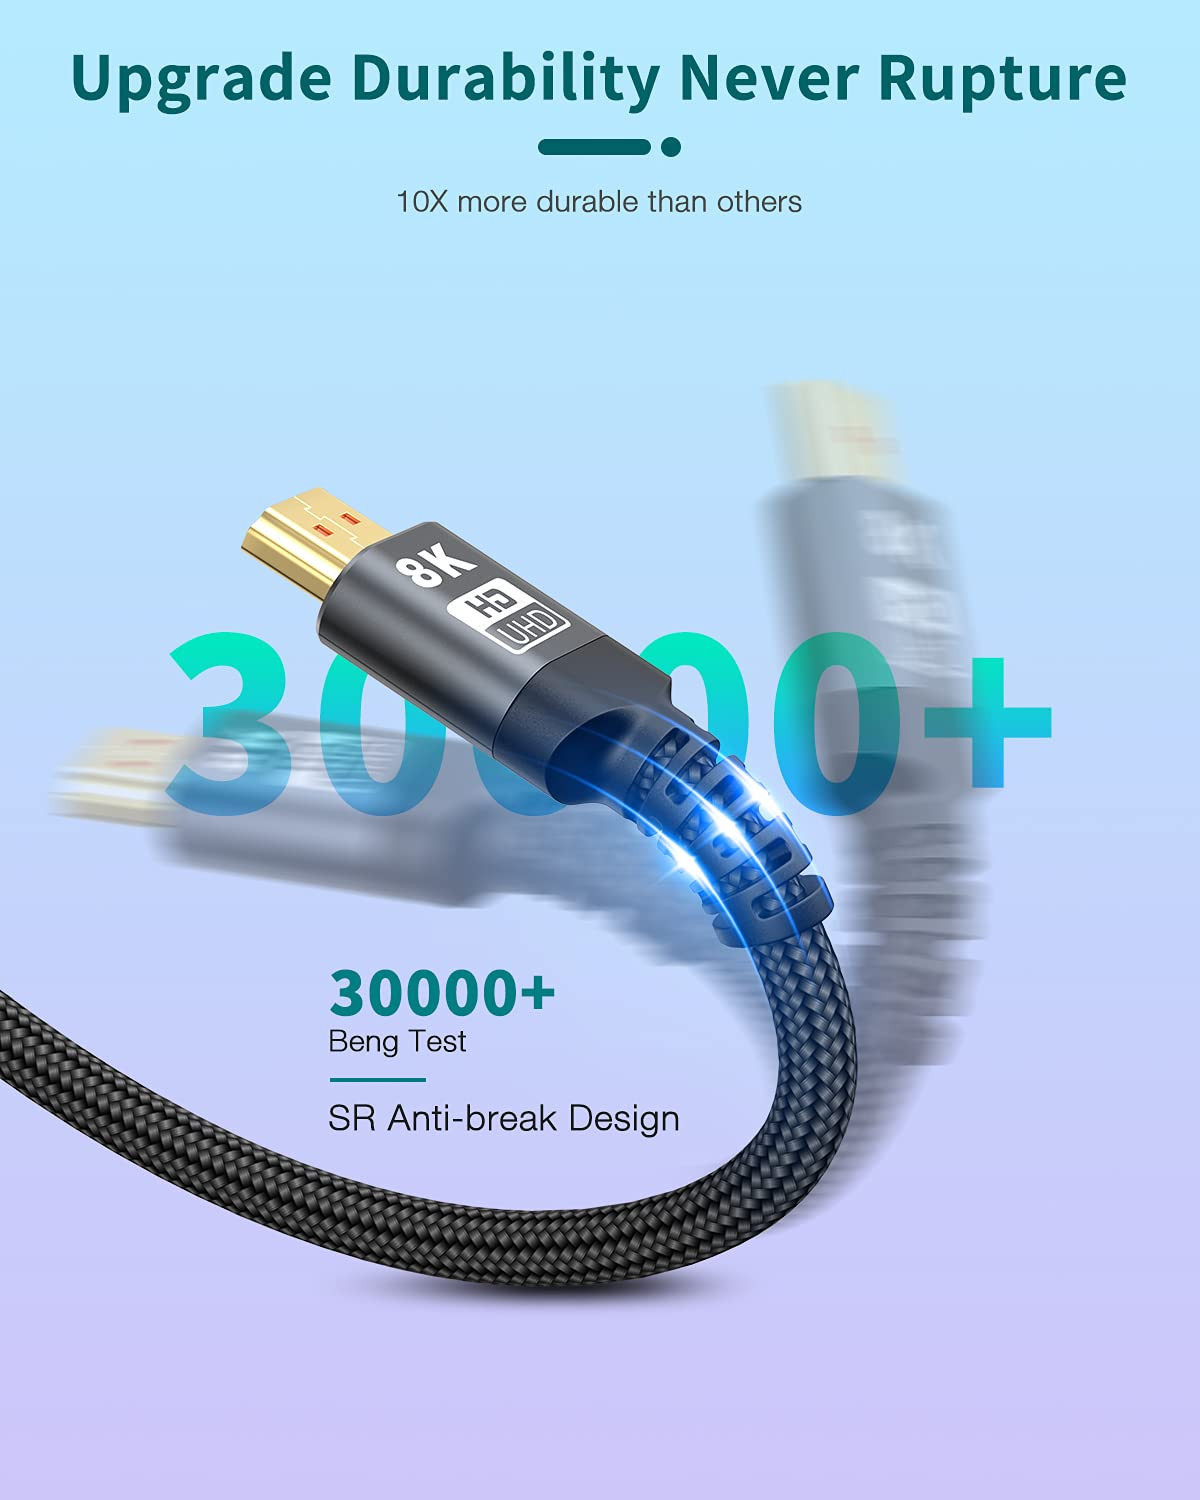 8K HDMI 2.1 Cable 10FT, Jansicotek 48Gbps High Speed 3D 8K60 4K120 144Hz  eARC RTX 3090 HDR10 4:4:4 HDCP 2.2&2.3 Dolby Compatible with Playstation  5/PS5, Xbox Series X, Roku/Fire/Sony/LG 